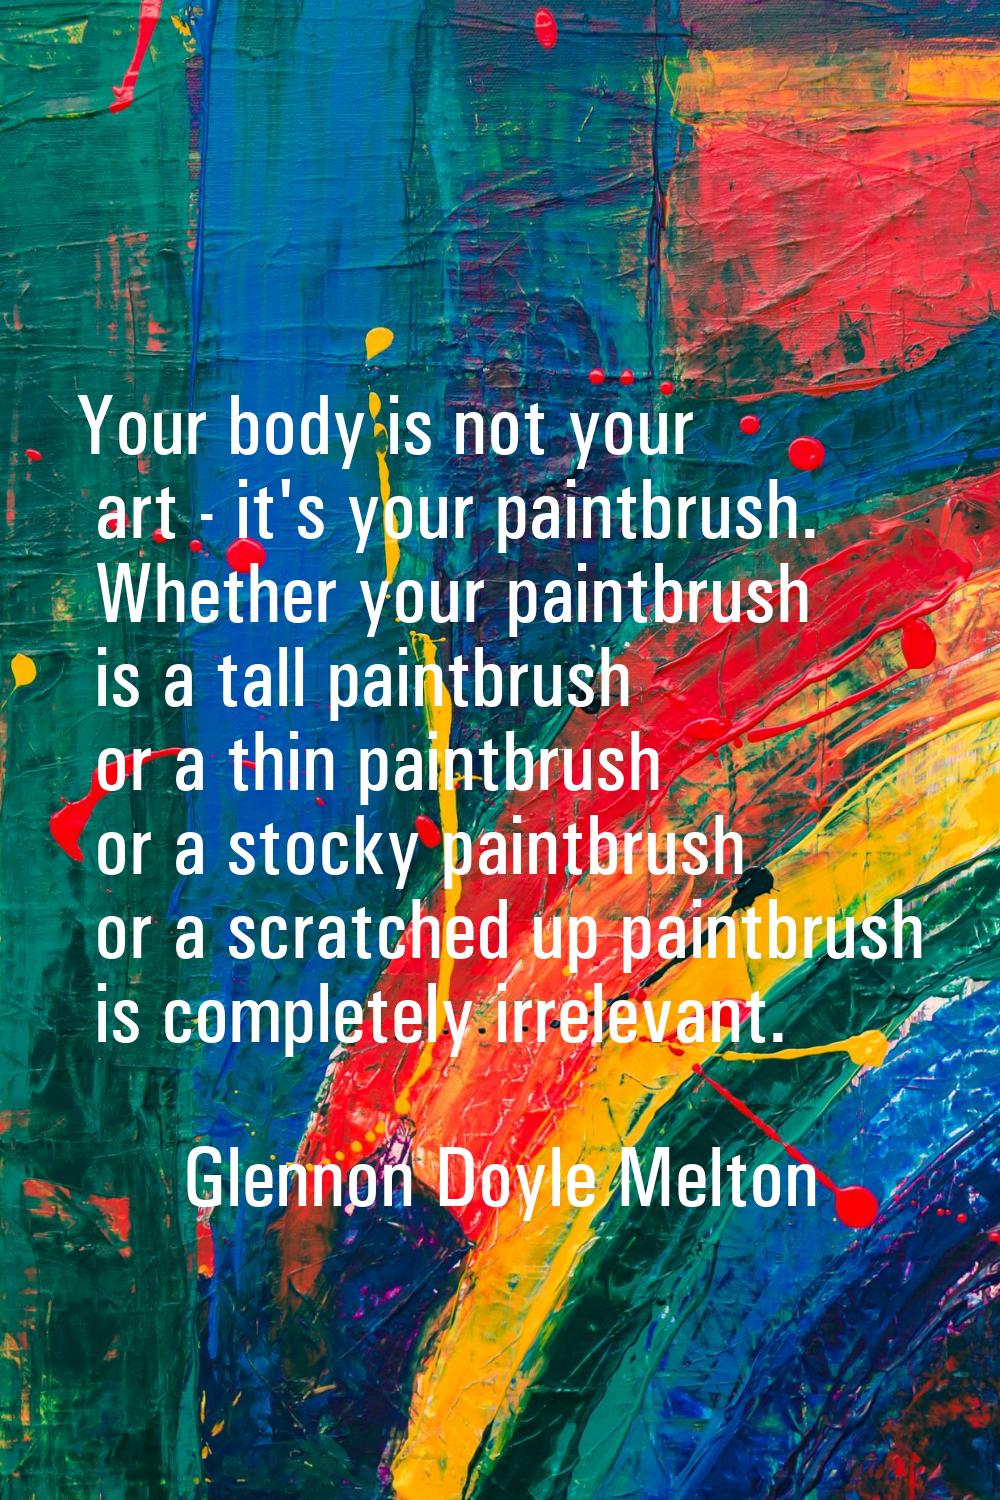 Your body is not your art - it's your paintbrush. Whether your paintbrush is a tall paintbrush or a